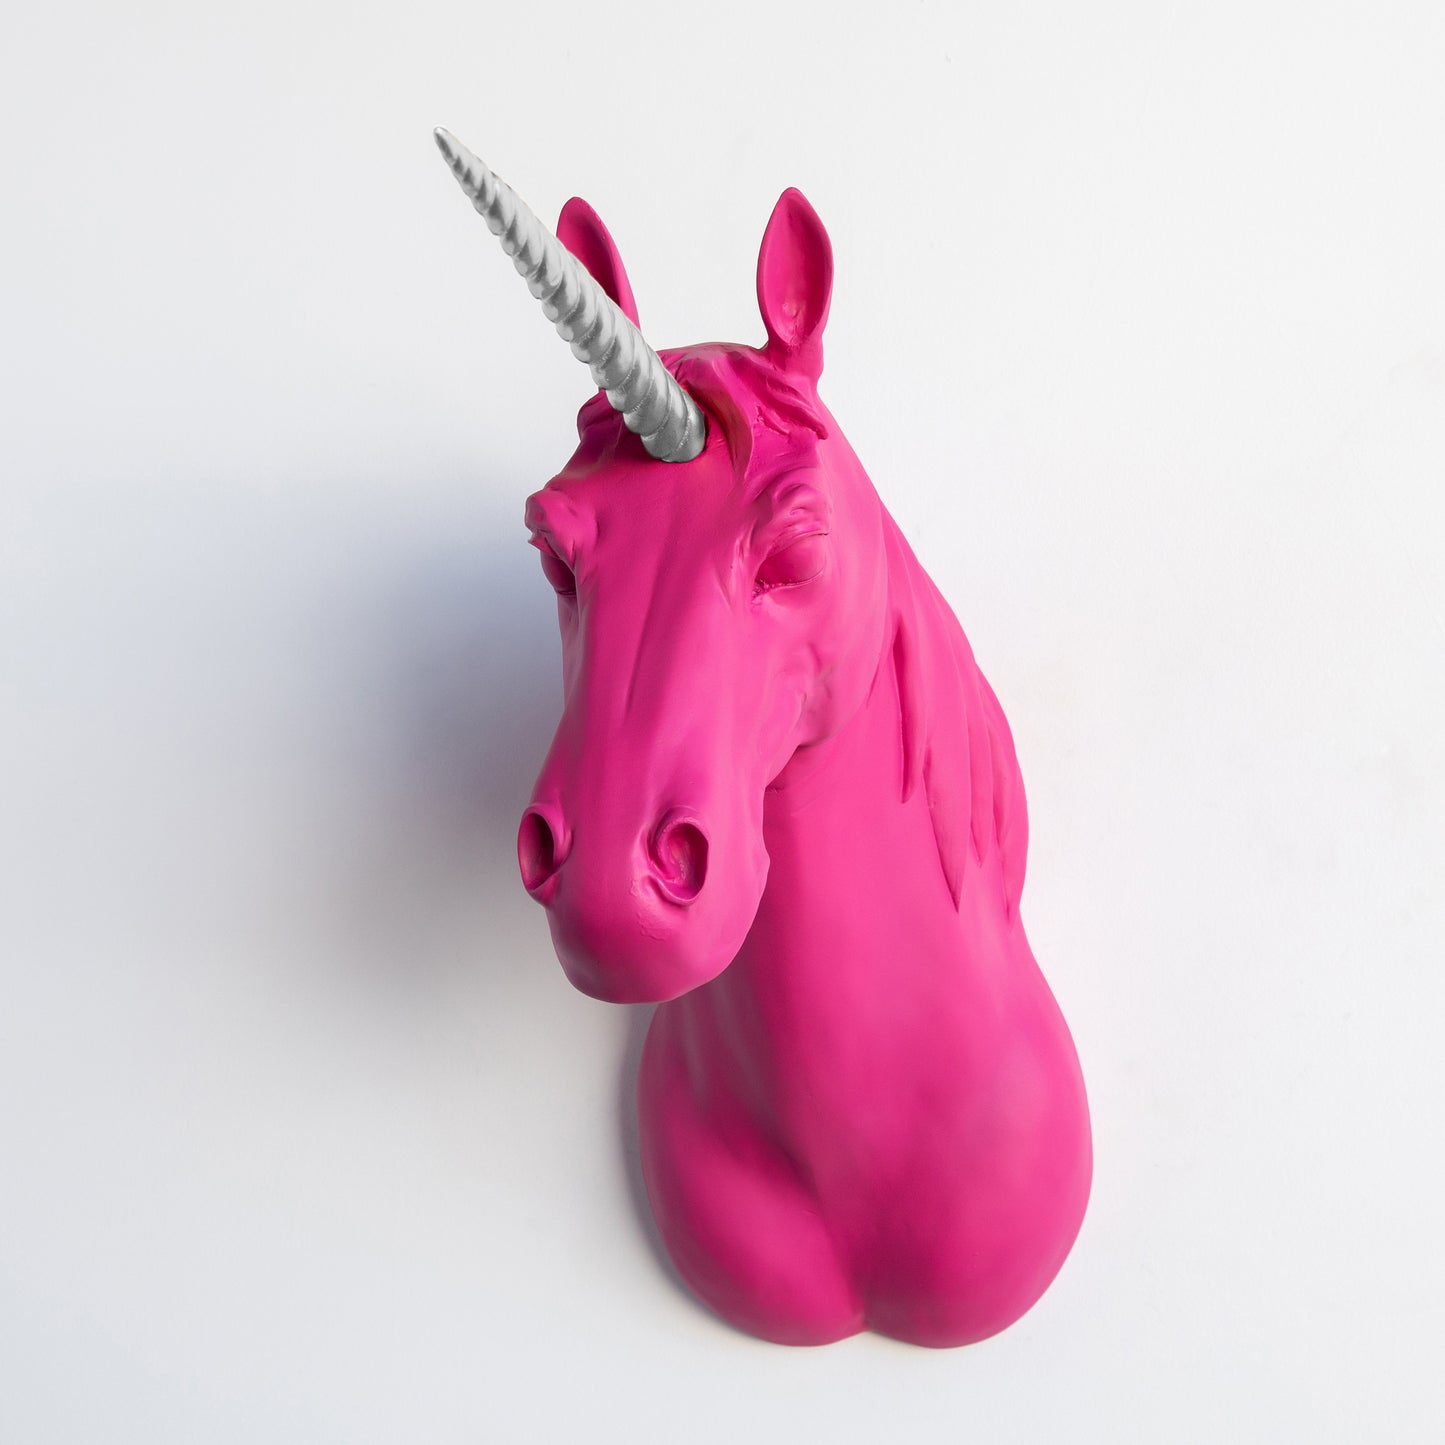 XL Unicorn Head Wall Mount // Hot Pink and Silver